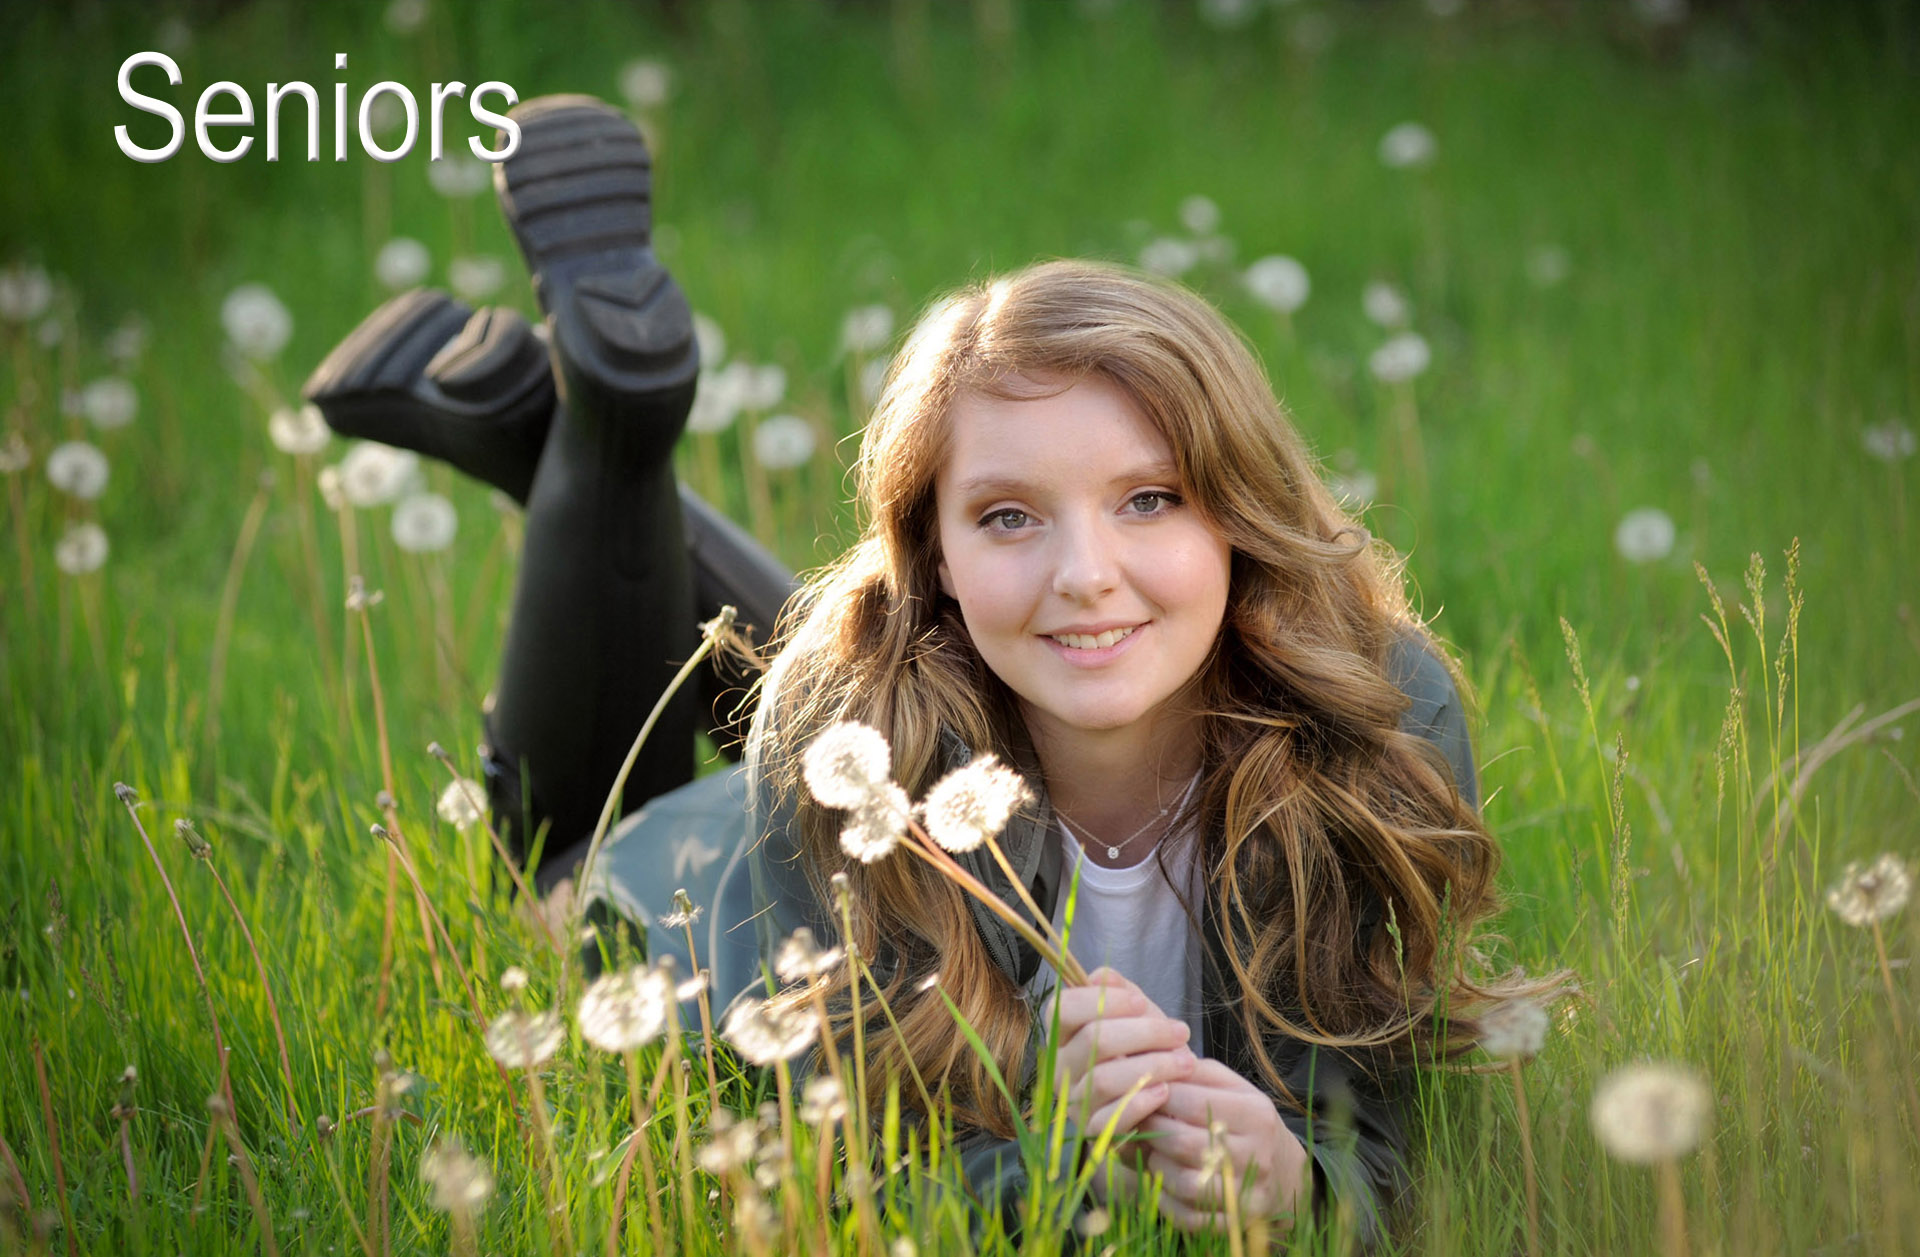 Fun senior photos taken in the Troy, Michigan area reflect the senior's personality and interests keeping the senior photo shoot fun and relaxed.